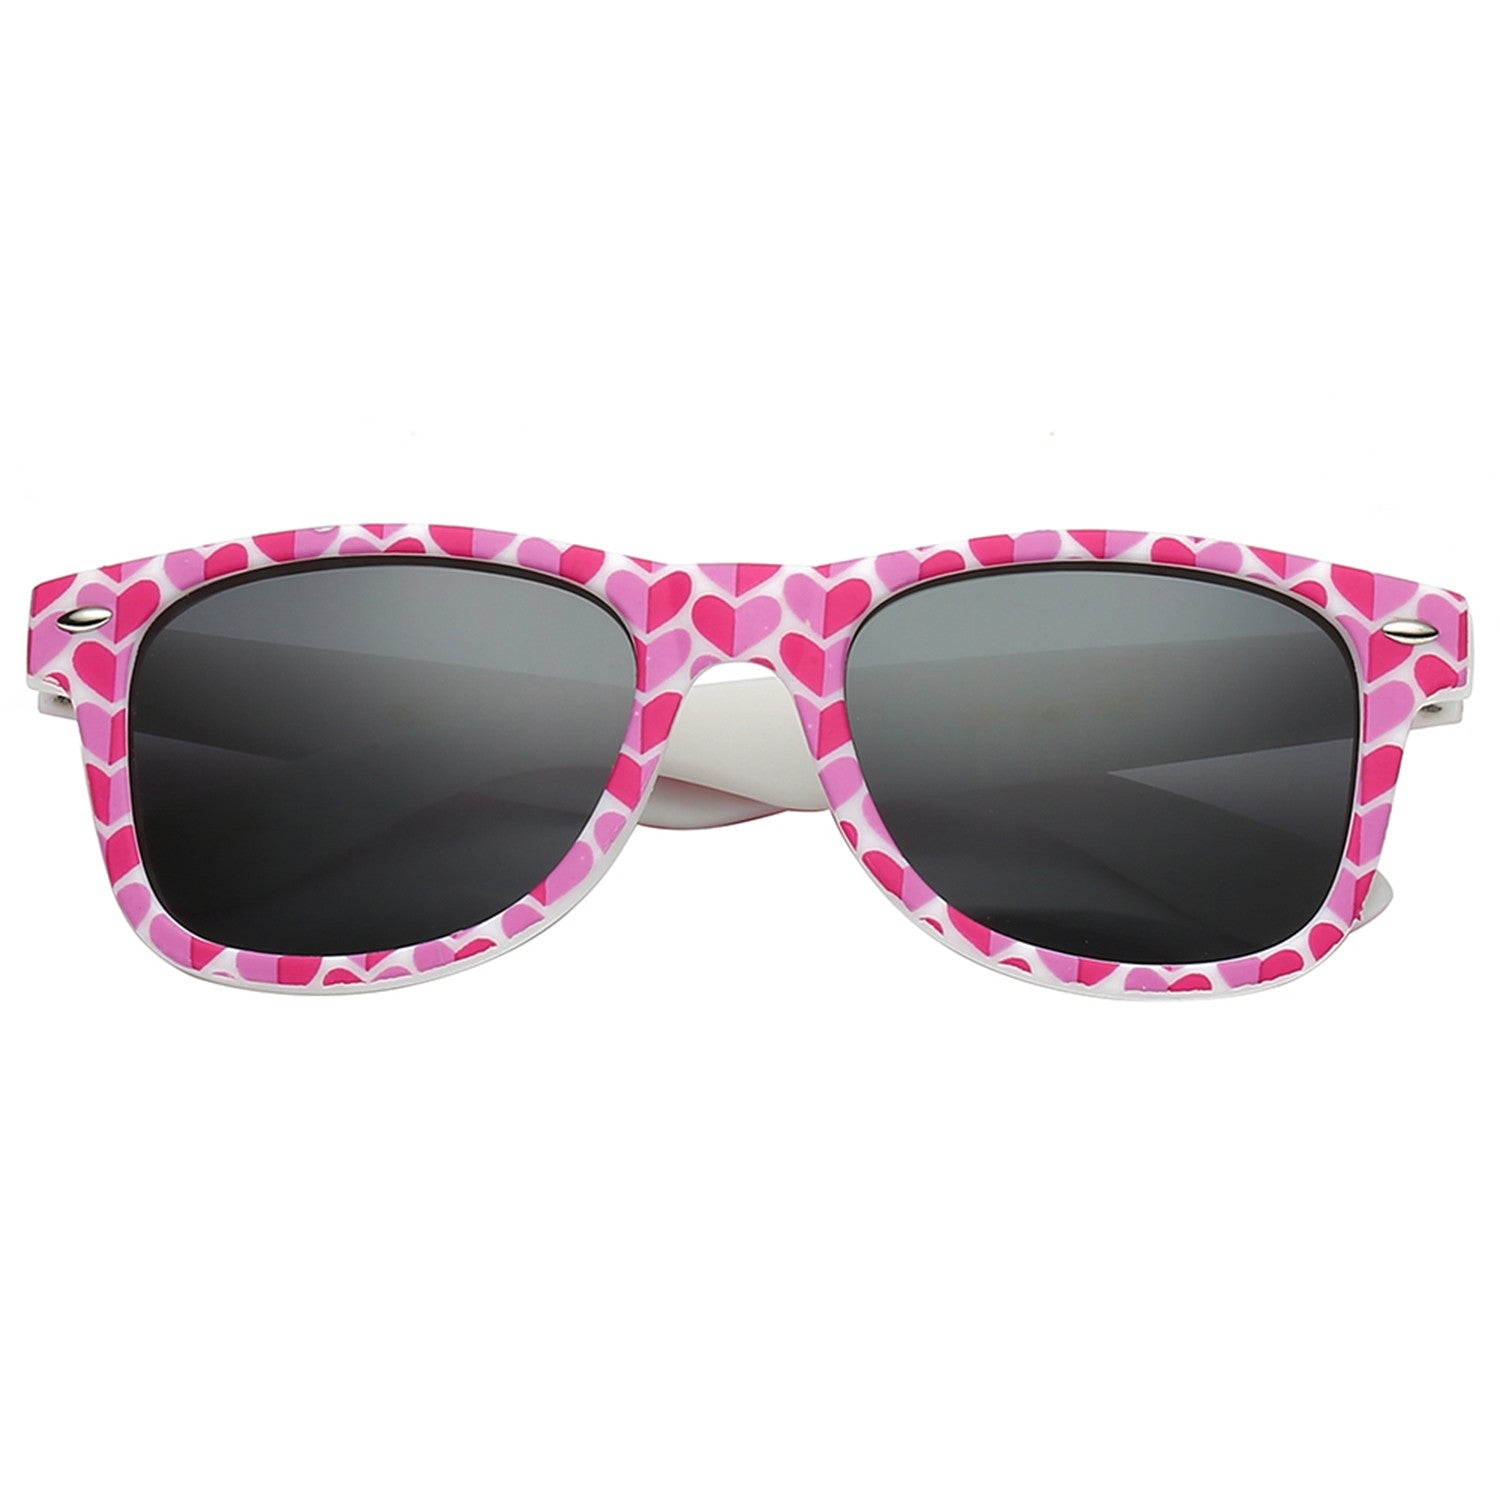 Polarspex Polarized 80's Retro Style Kids Sunglasses with Rubberized Valentine Heart Frames and Polarized Smoke Lenses for Boys and Girls